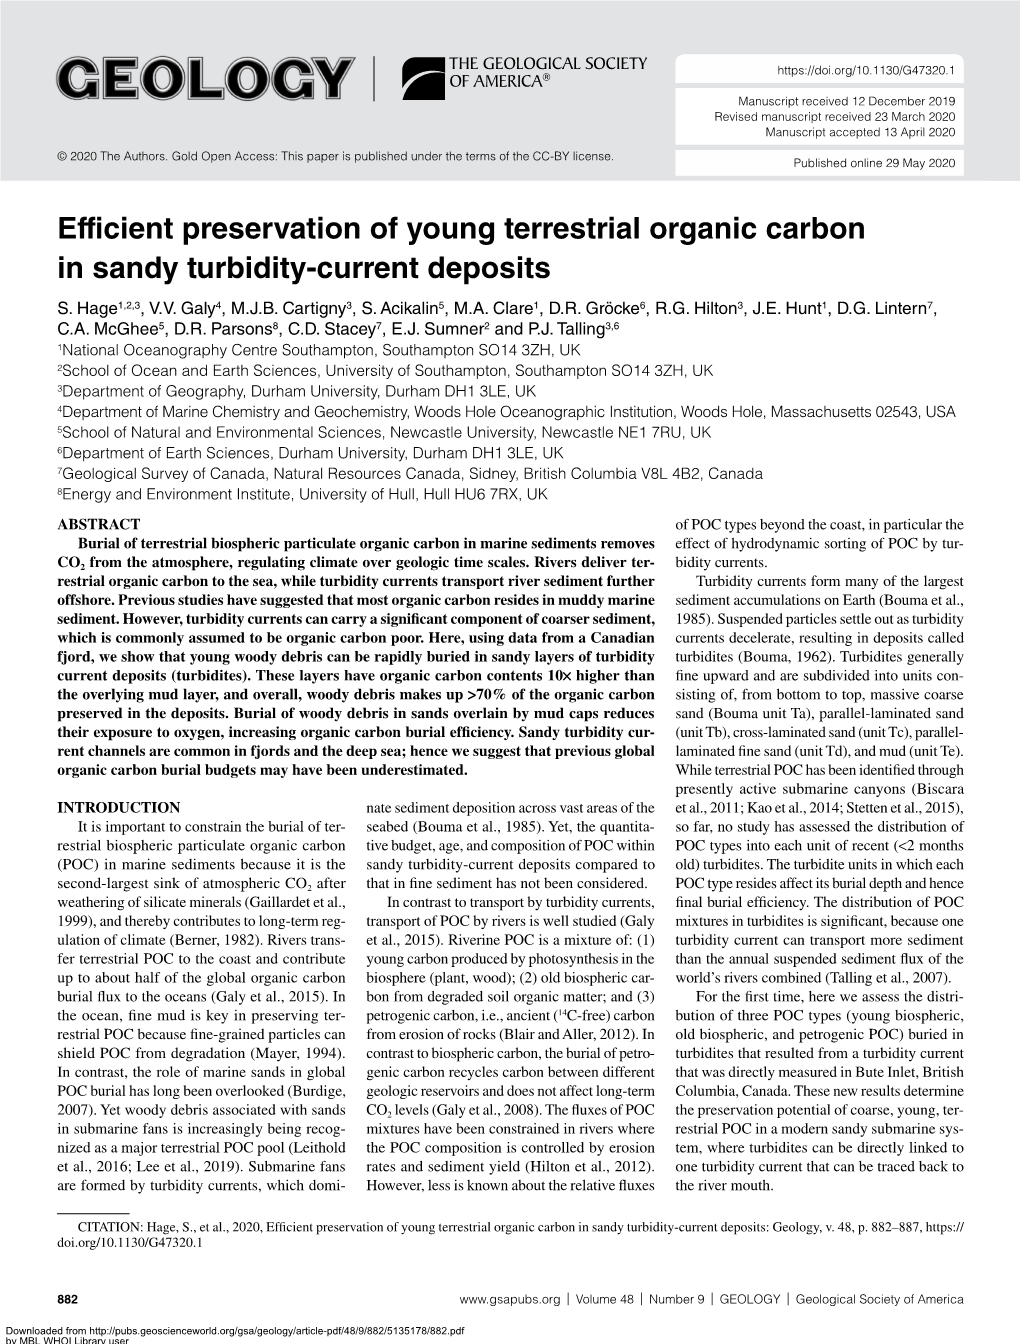 Efficient Preservation of Young Terrestrial Organic Carbon in Sandy Turbidity-Current Deposits S